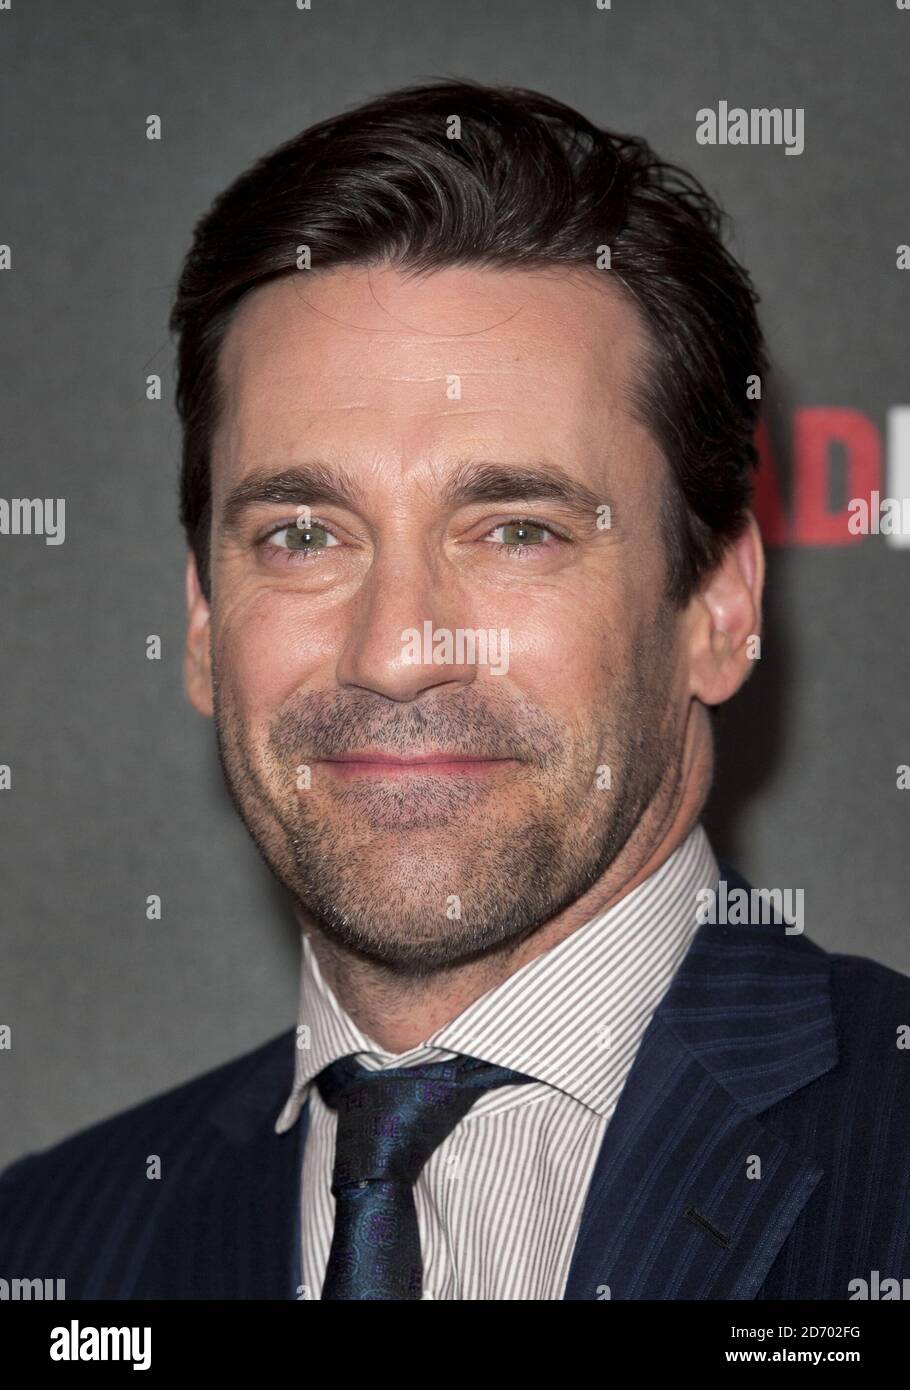 Actor Jon Hamm at the Curzon Mayfair cinema, before The BAFTA Interview with Jo Whiley. Stock Photo